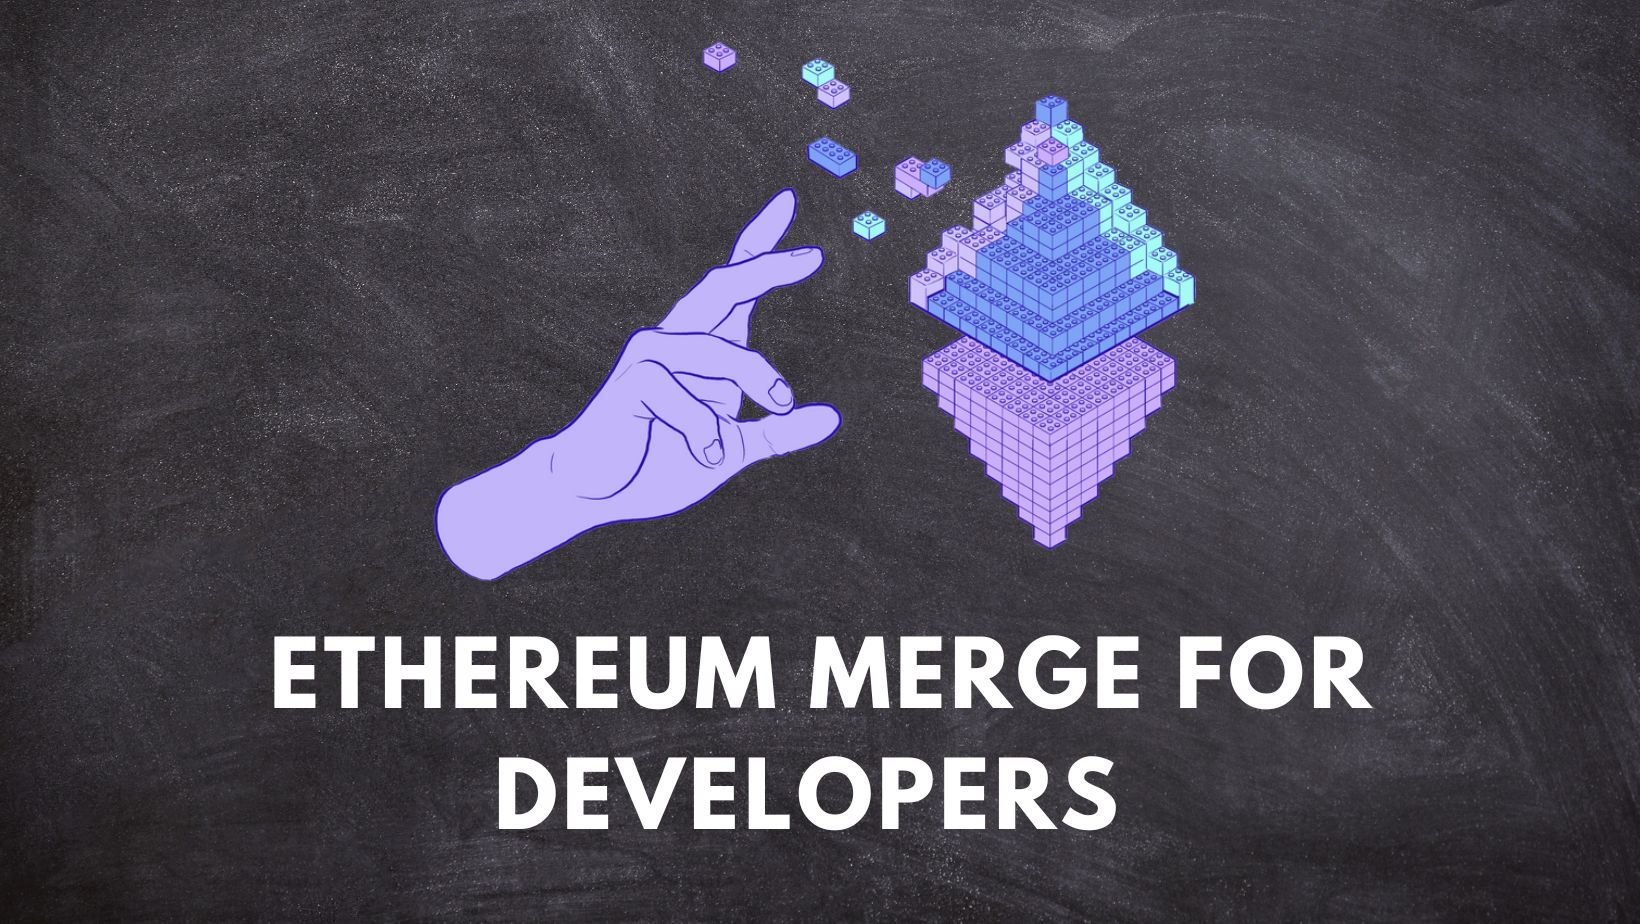 Ethereum Merge From The Developer’s Perspective